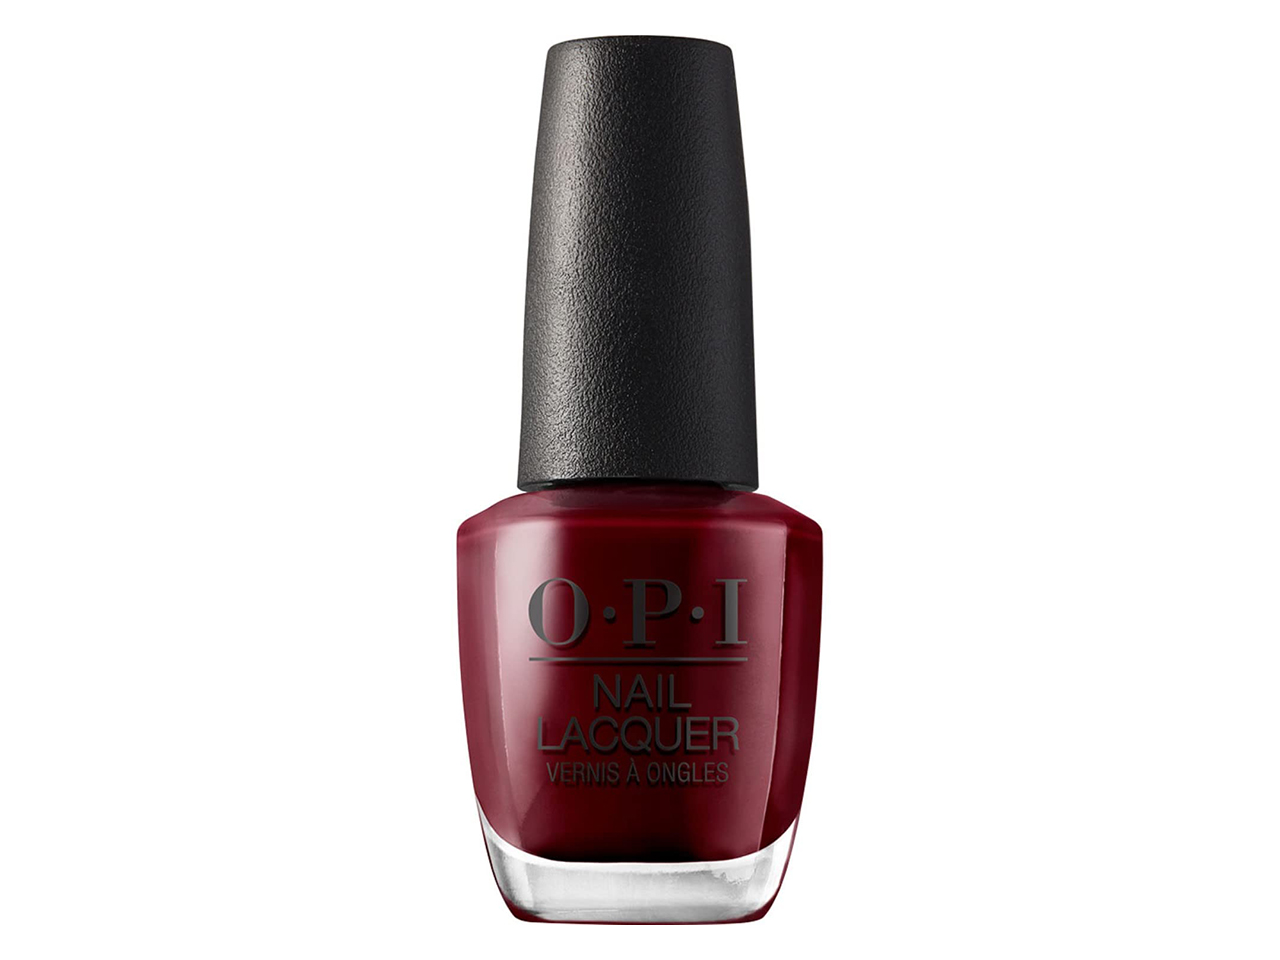 OPI Nail Lacquer in Got the Blues for Red, at-home pedicure